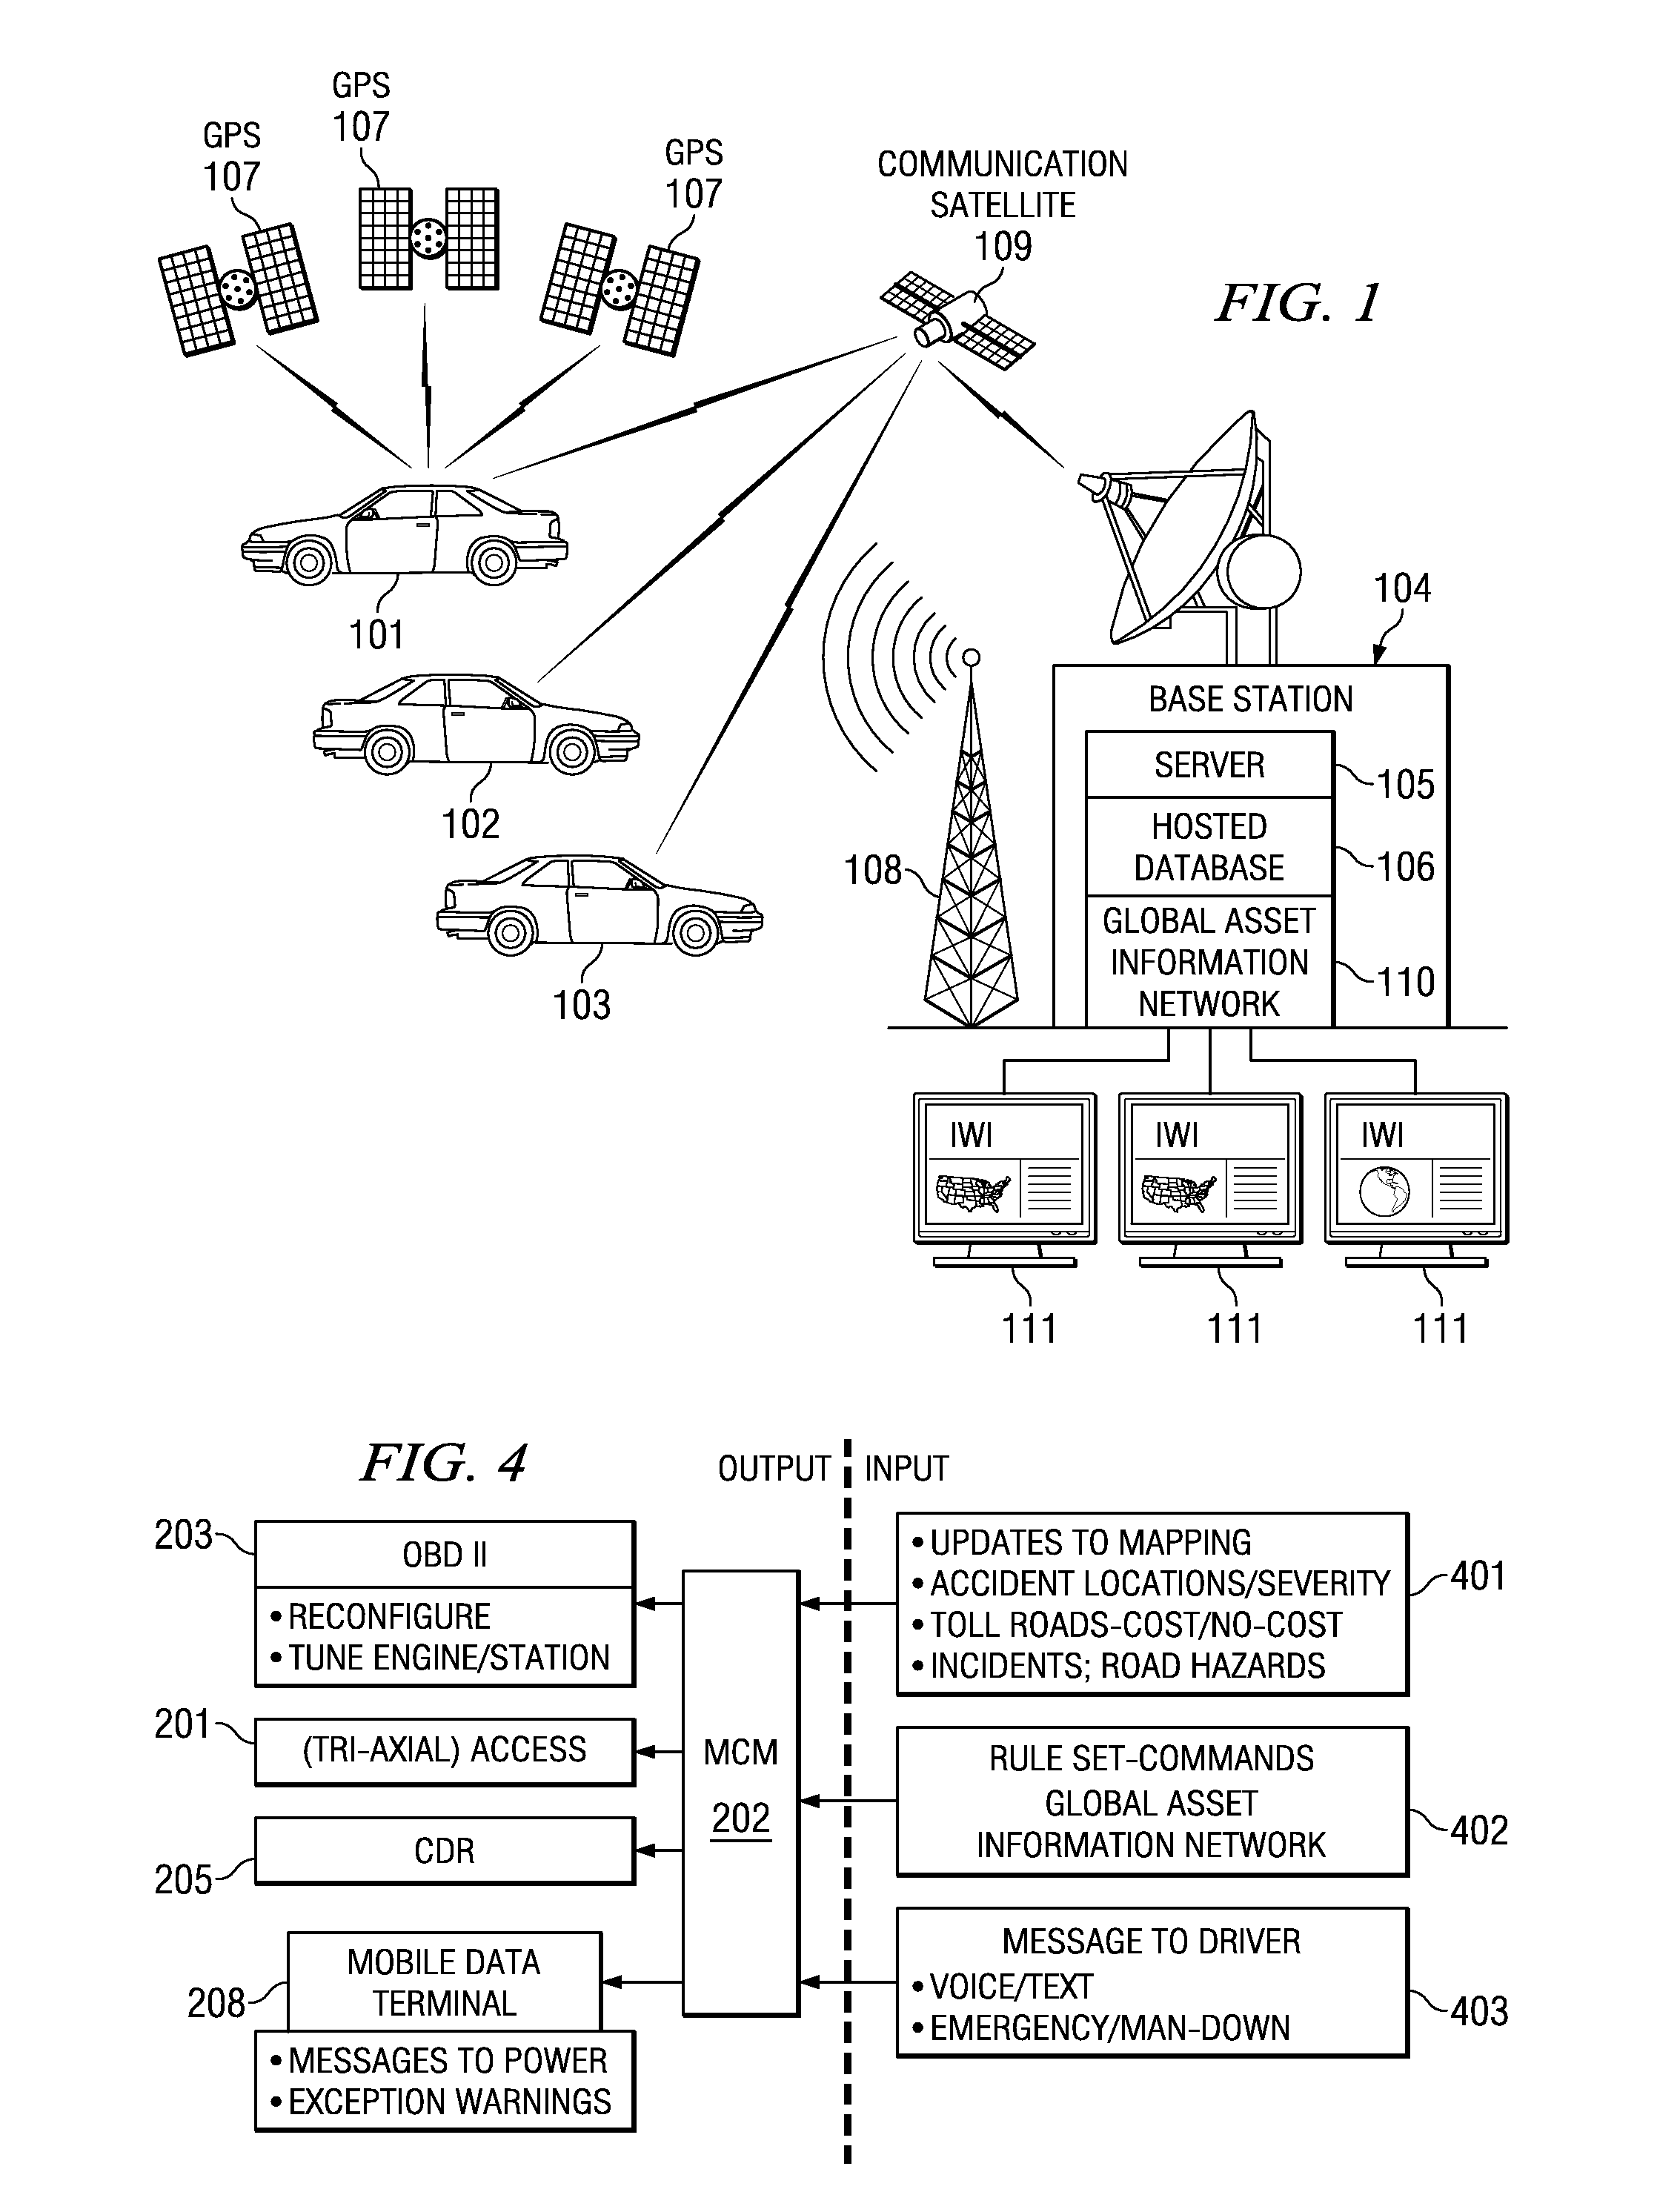 System and method for monitoring and updating speed-by-street data